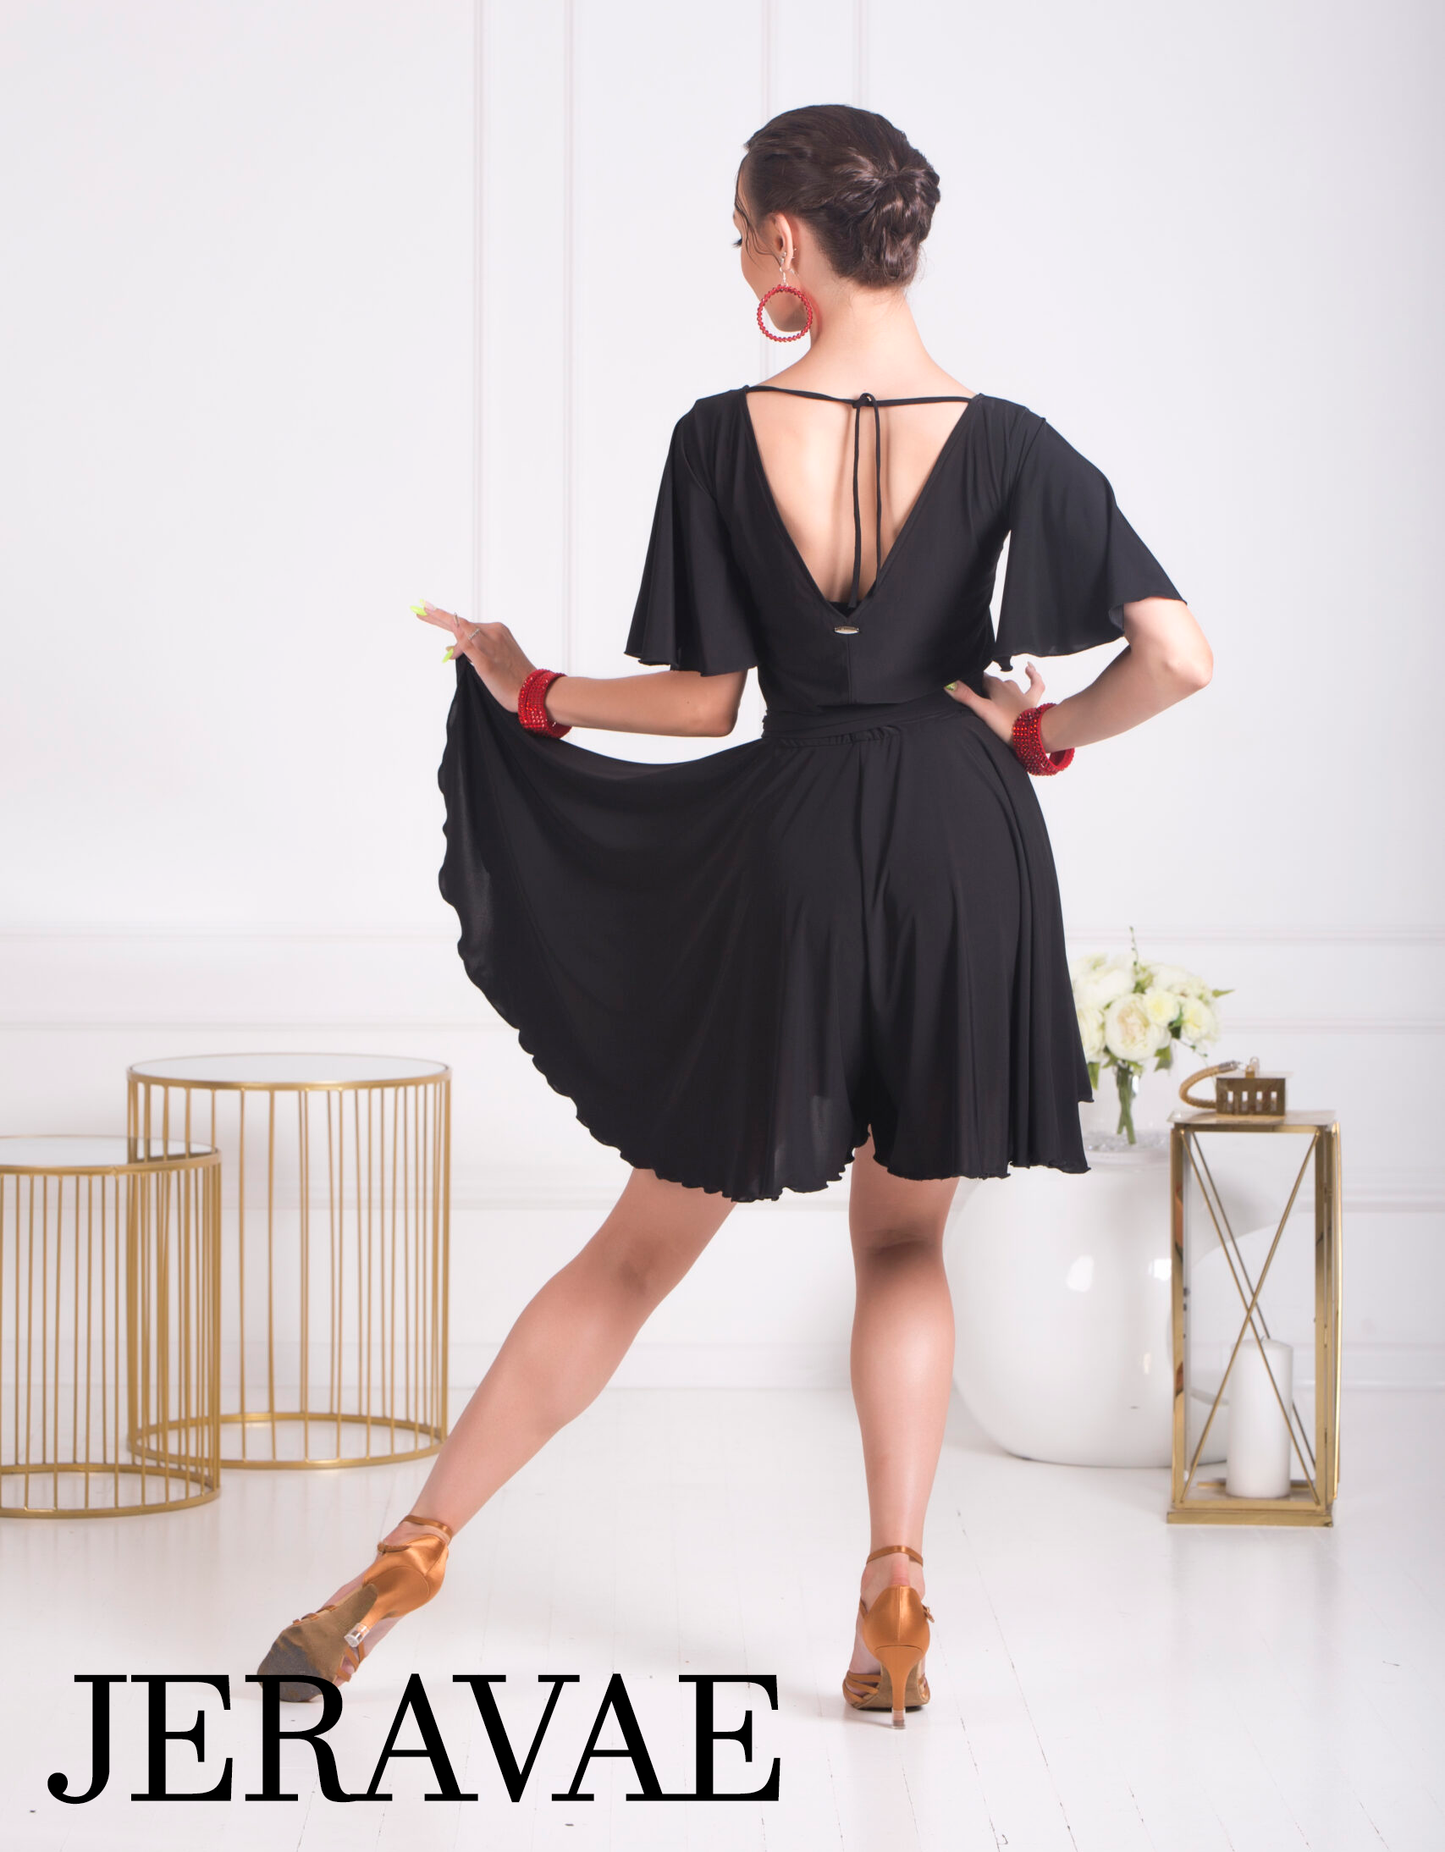 Body Positive Senga Dancewear PARA PARA Black Jumpsuit with Shorts, Belt with Decorative Buckle, and Loose Sleeves Sizes XL-4XL PRA 1070 in Stock